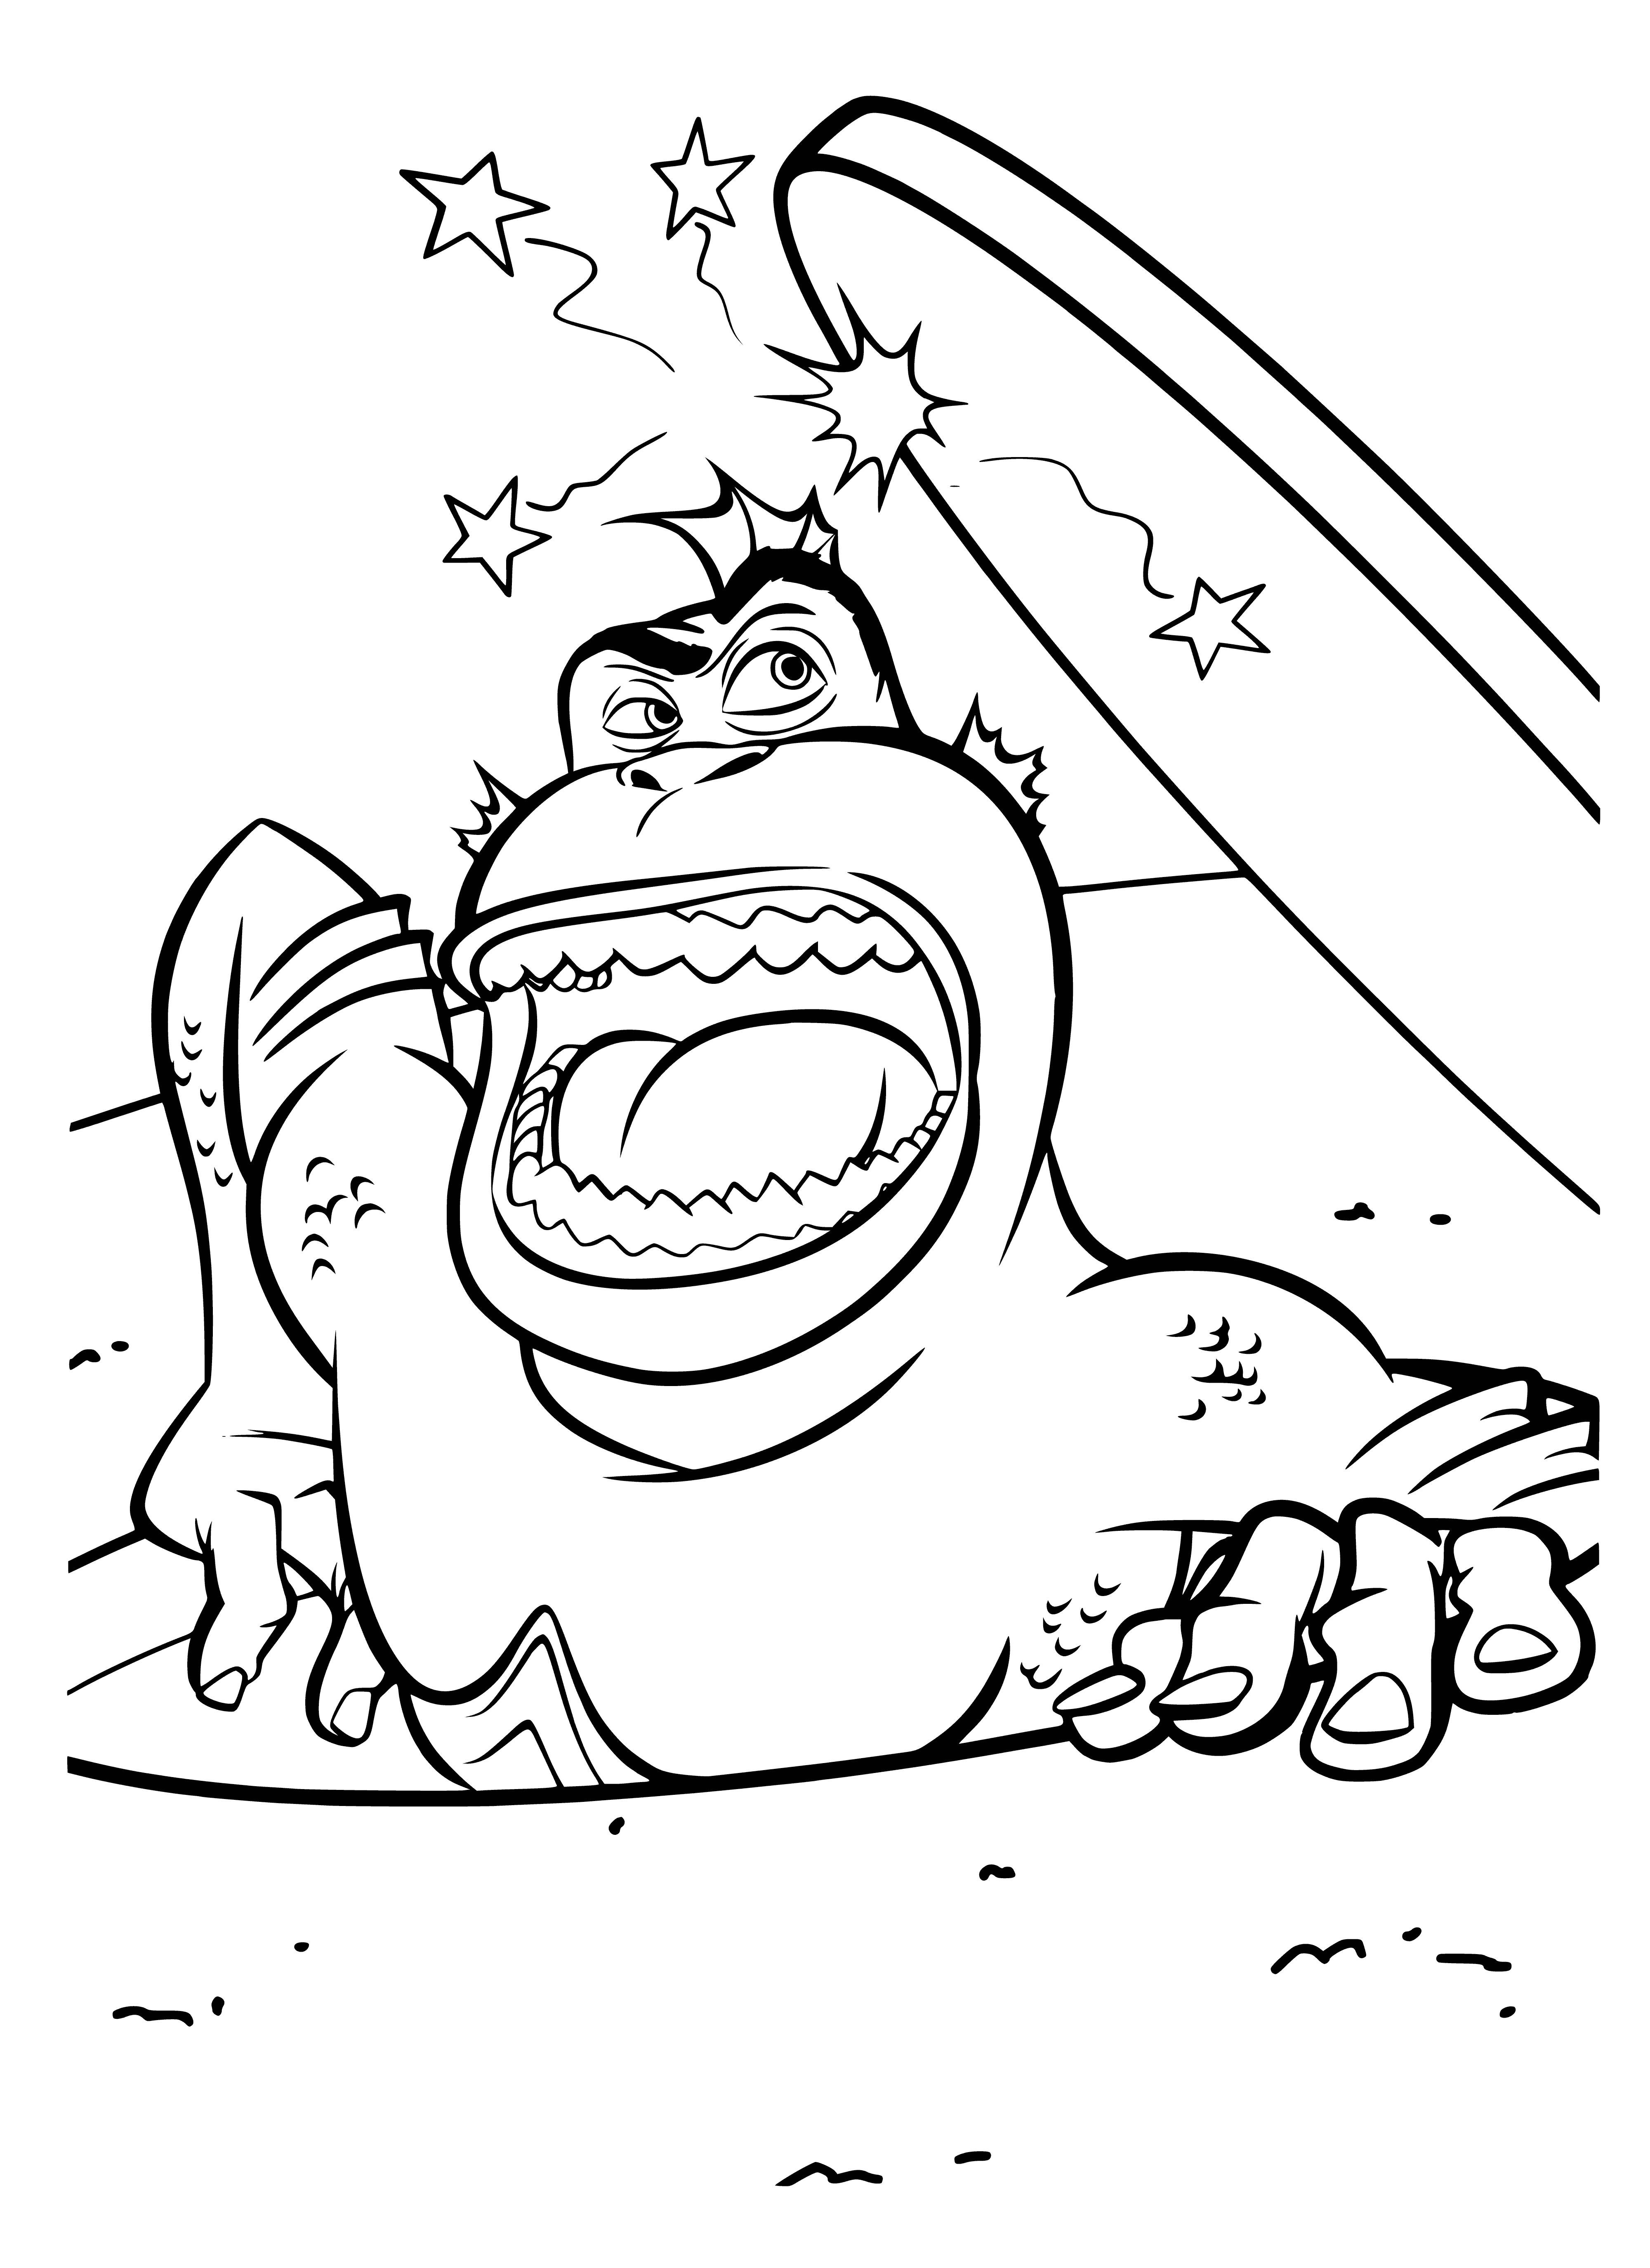 coloring page: Blue 3-eyed alien with ray gun & sharp teeth, left hand raised. Green plant in background.